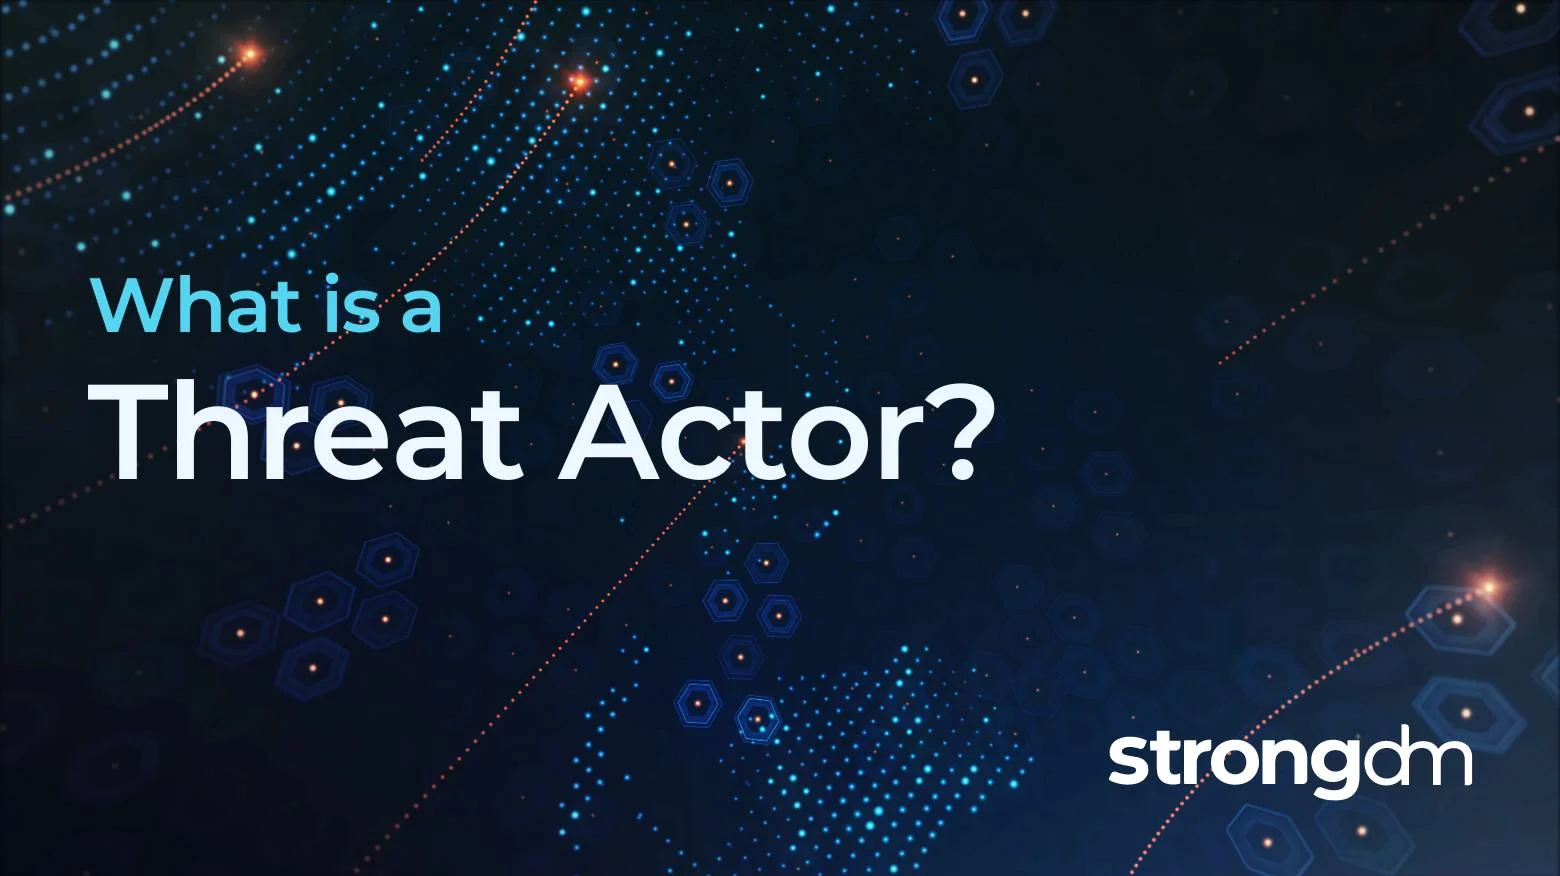 What is a Threat Actor?